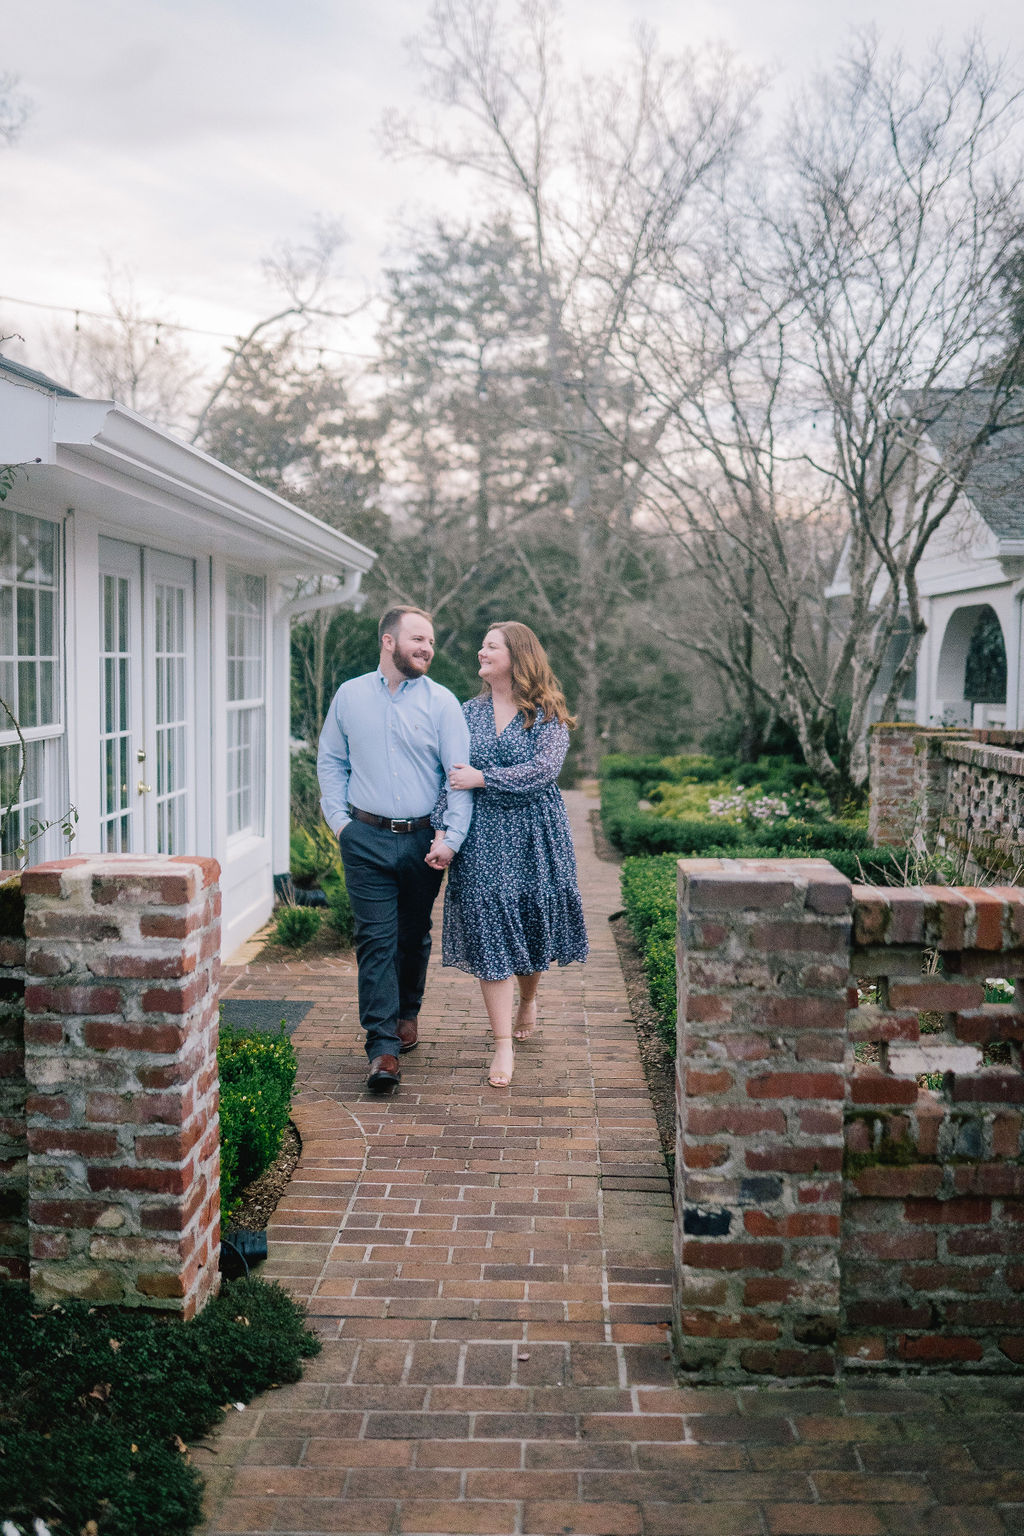 engagement session in the garden of a Knoxville home. Couple walking towards the camera past a greenhouse. Brick wall and stone path